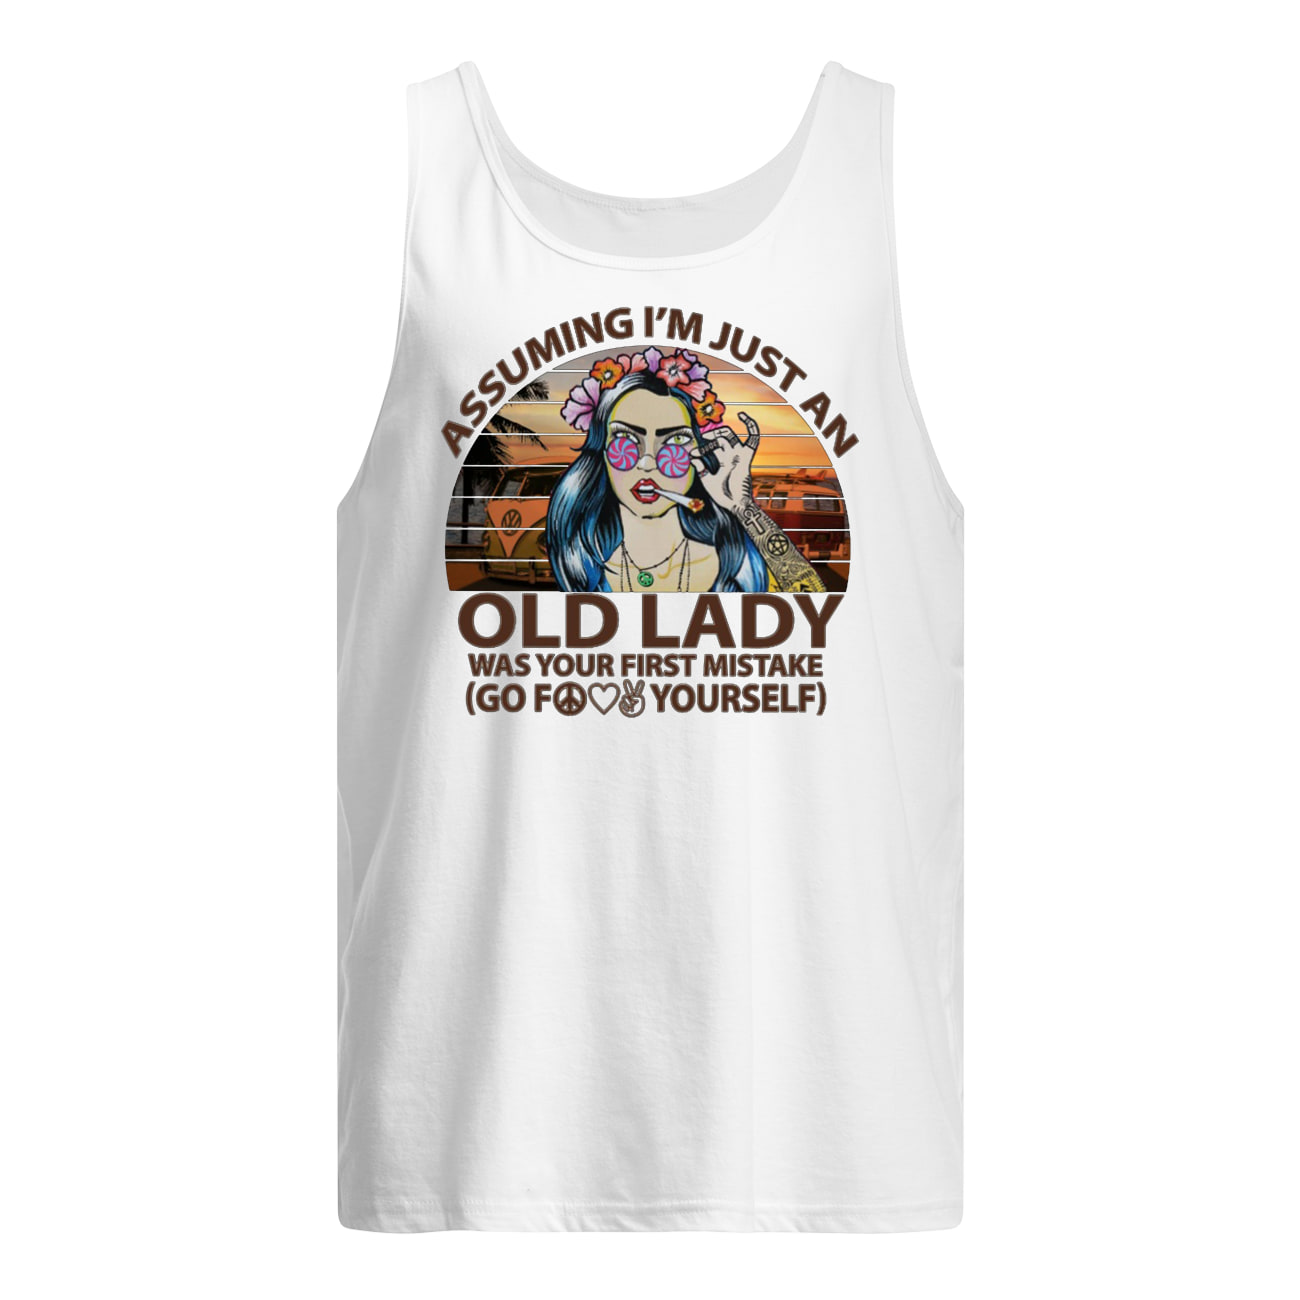 Hippie girl assuming I'm just an old lady was your first mistake vintage tank top